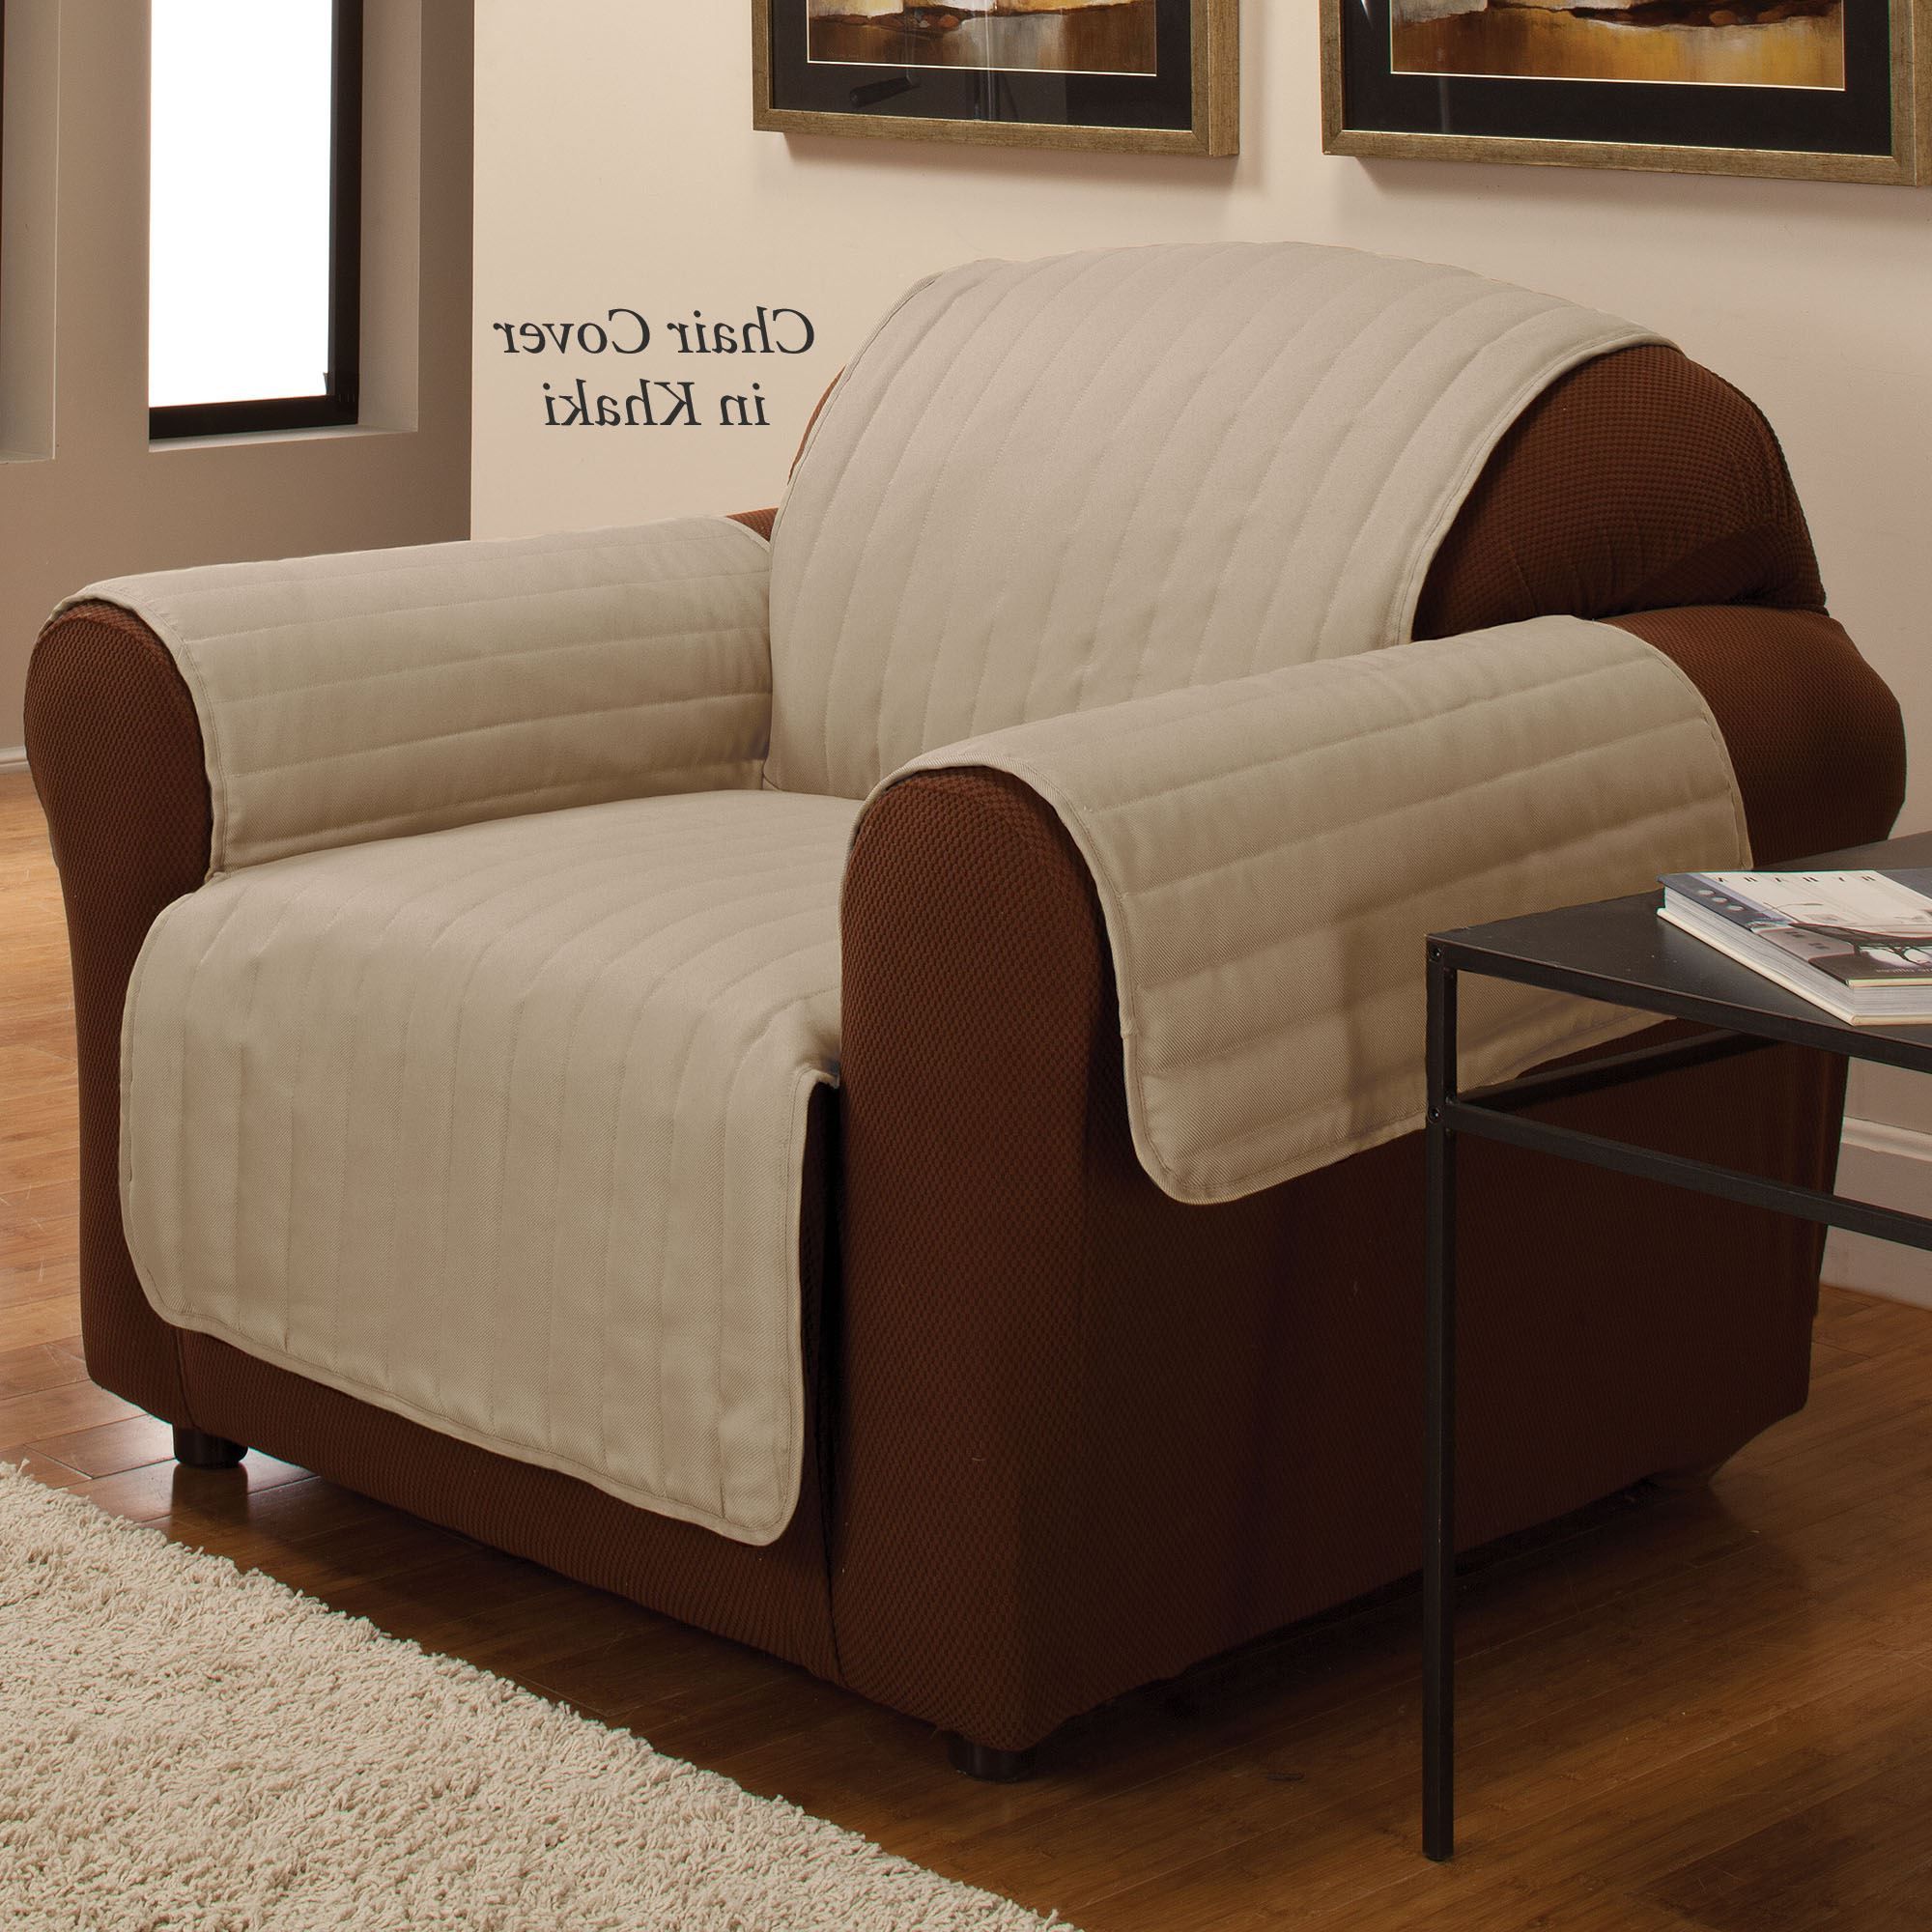 Covers For Sofas And Chairs Inside Current Twill Pet Furniture Cover (View 11 of 20)